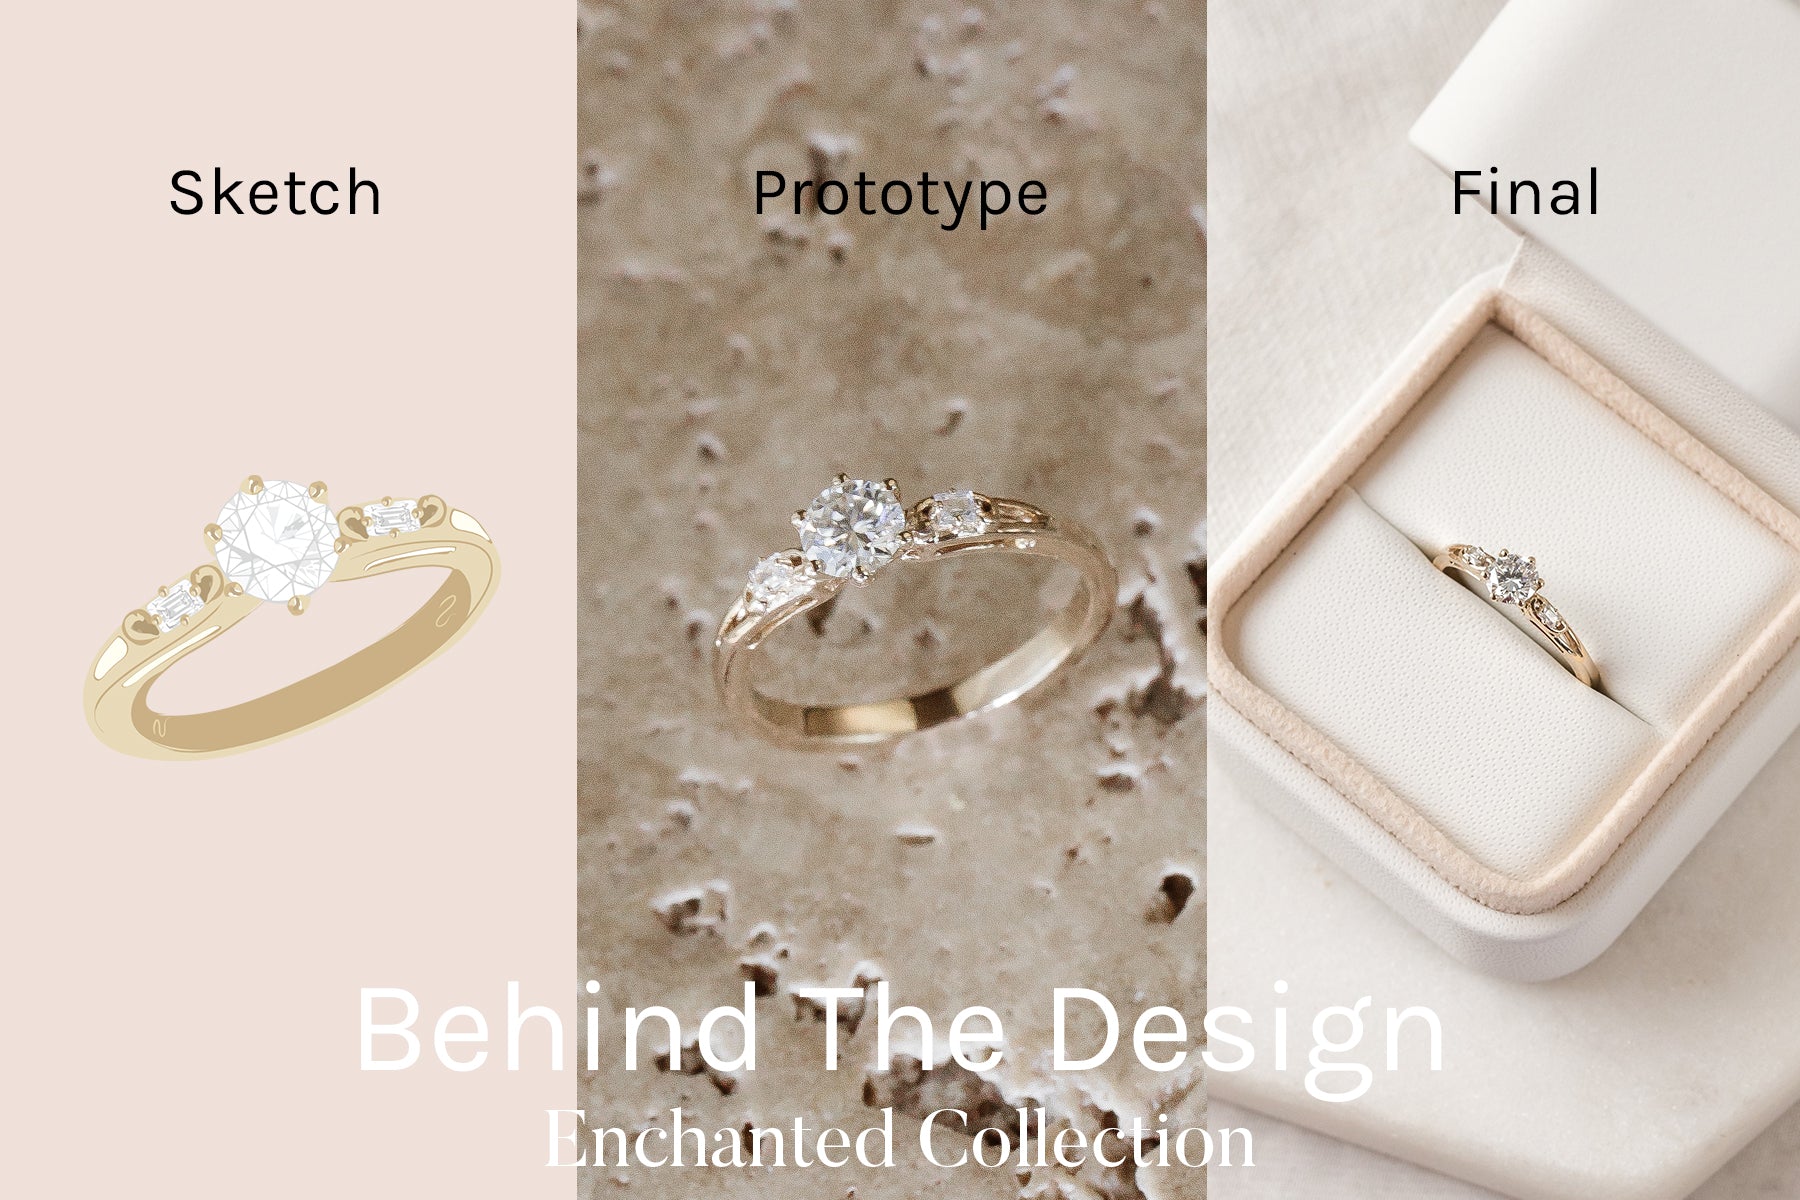 Behind The Design - Enchanted Collection